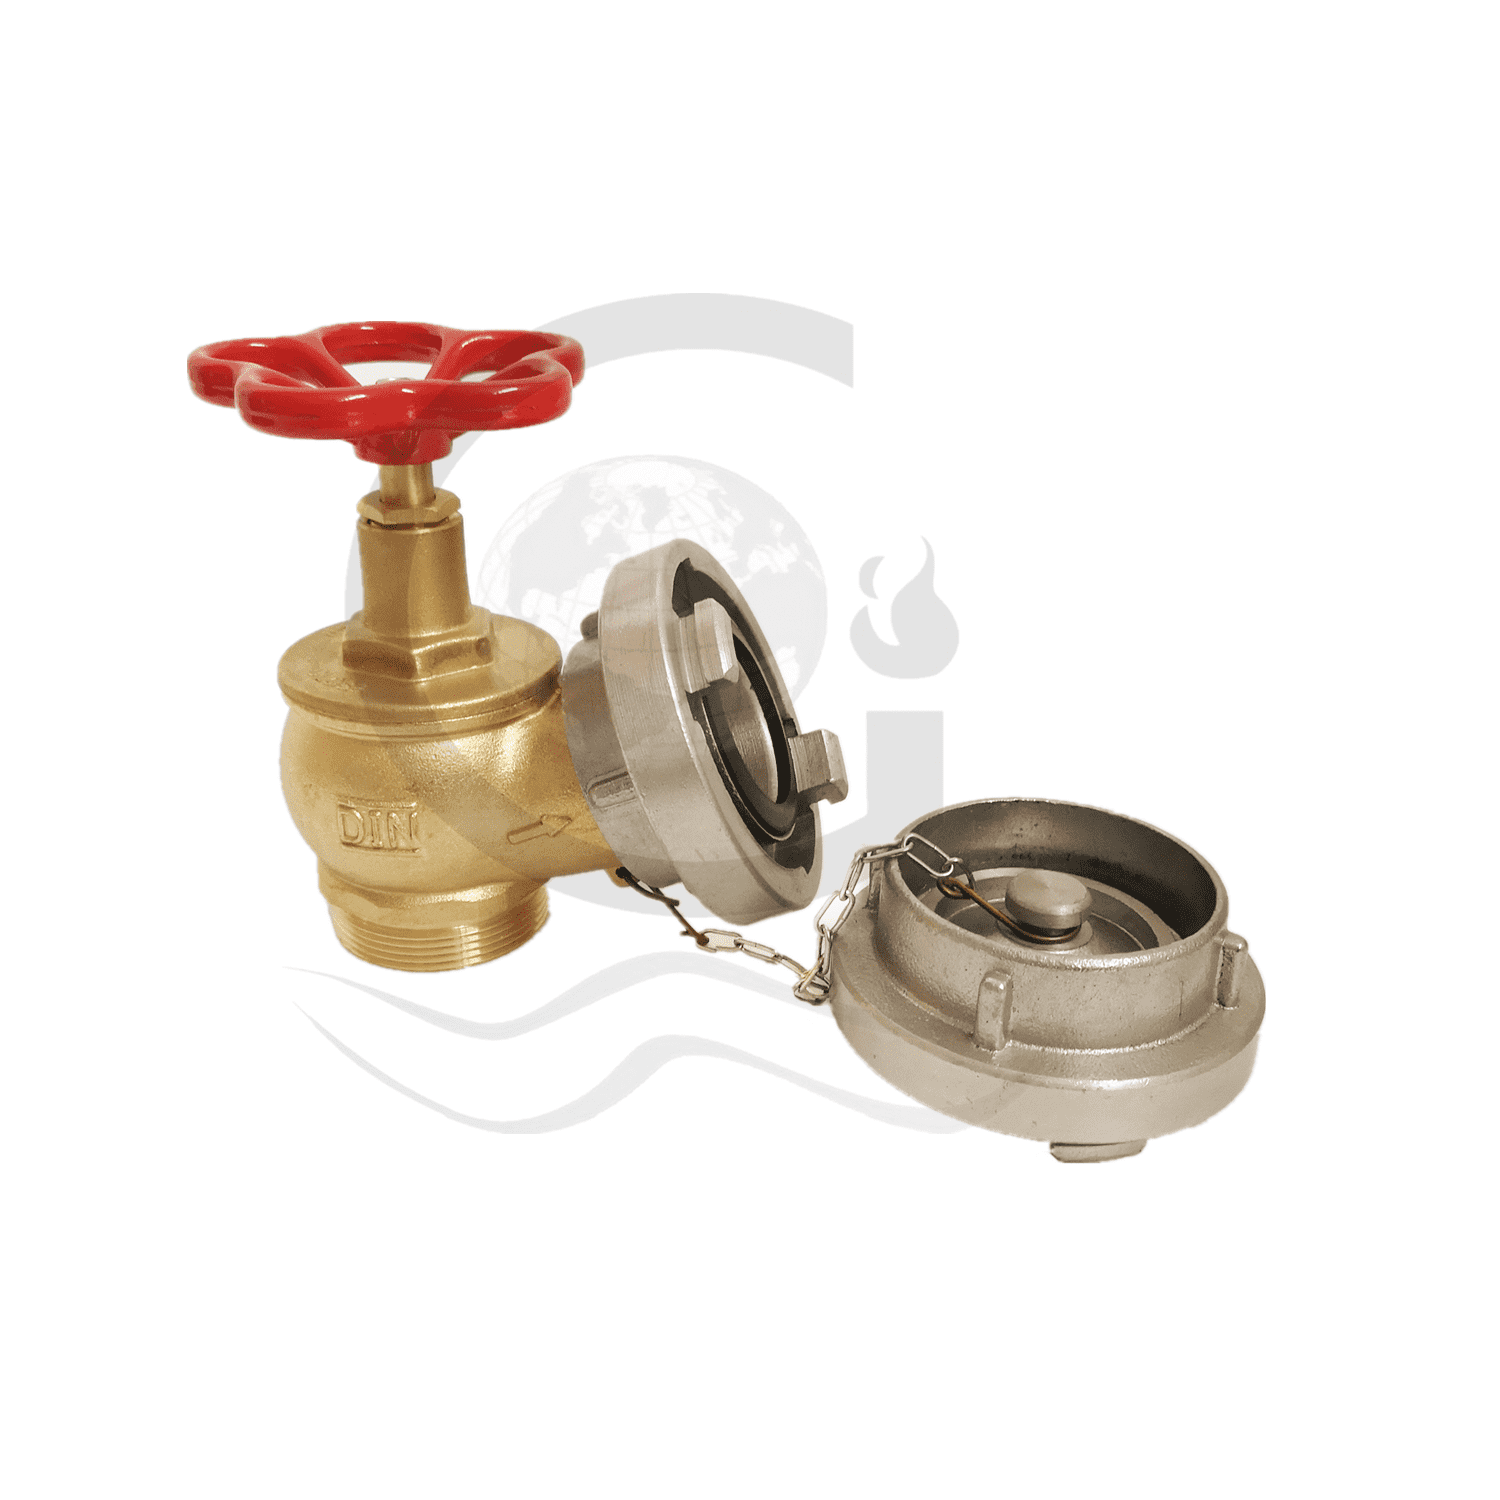 Din landing valve with storz adapter with cap Featured Image